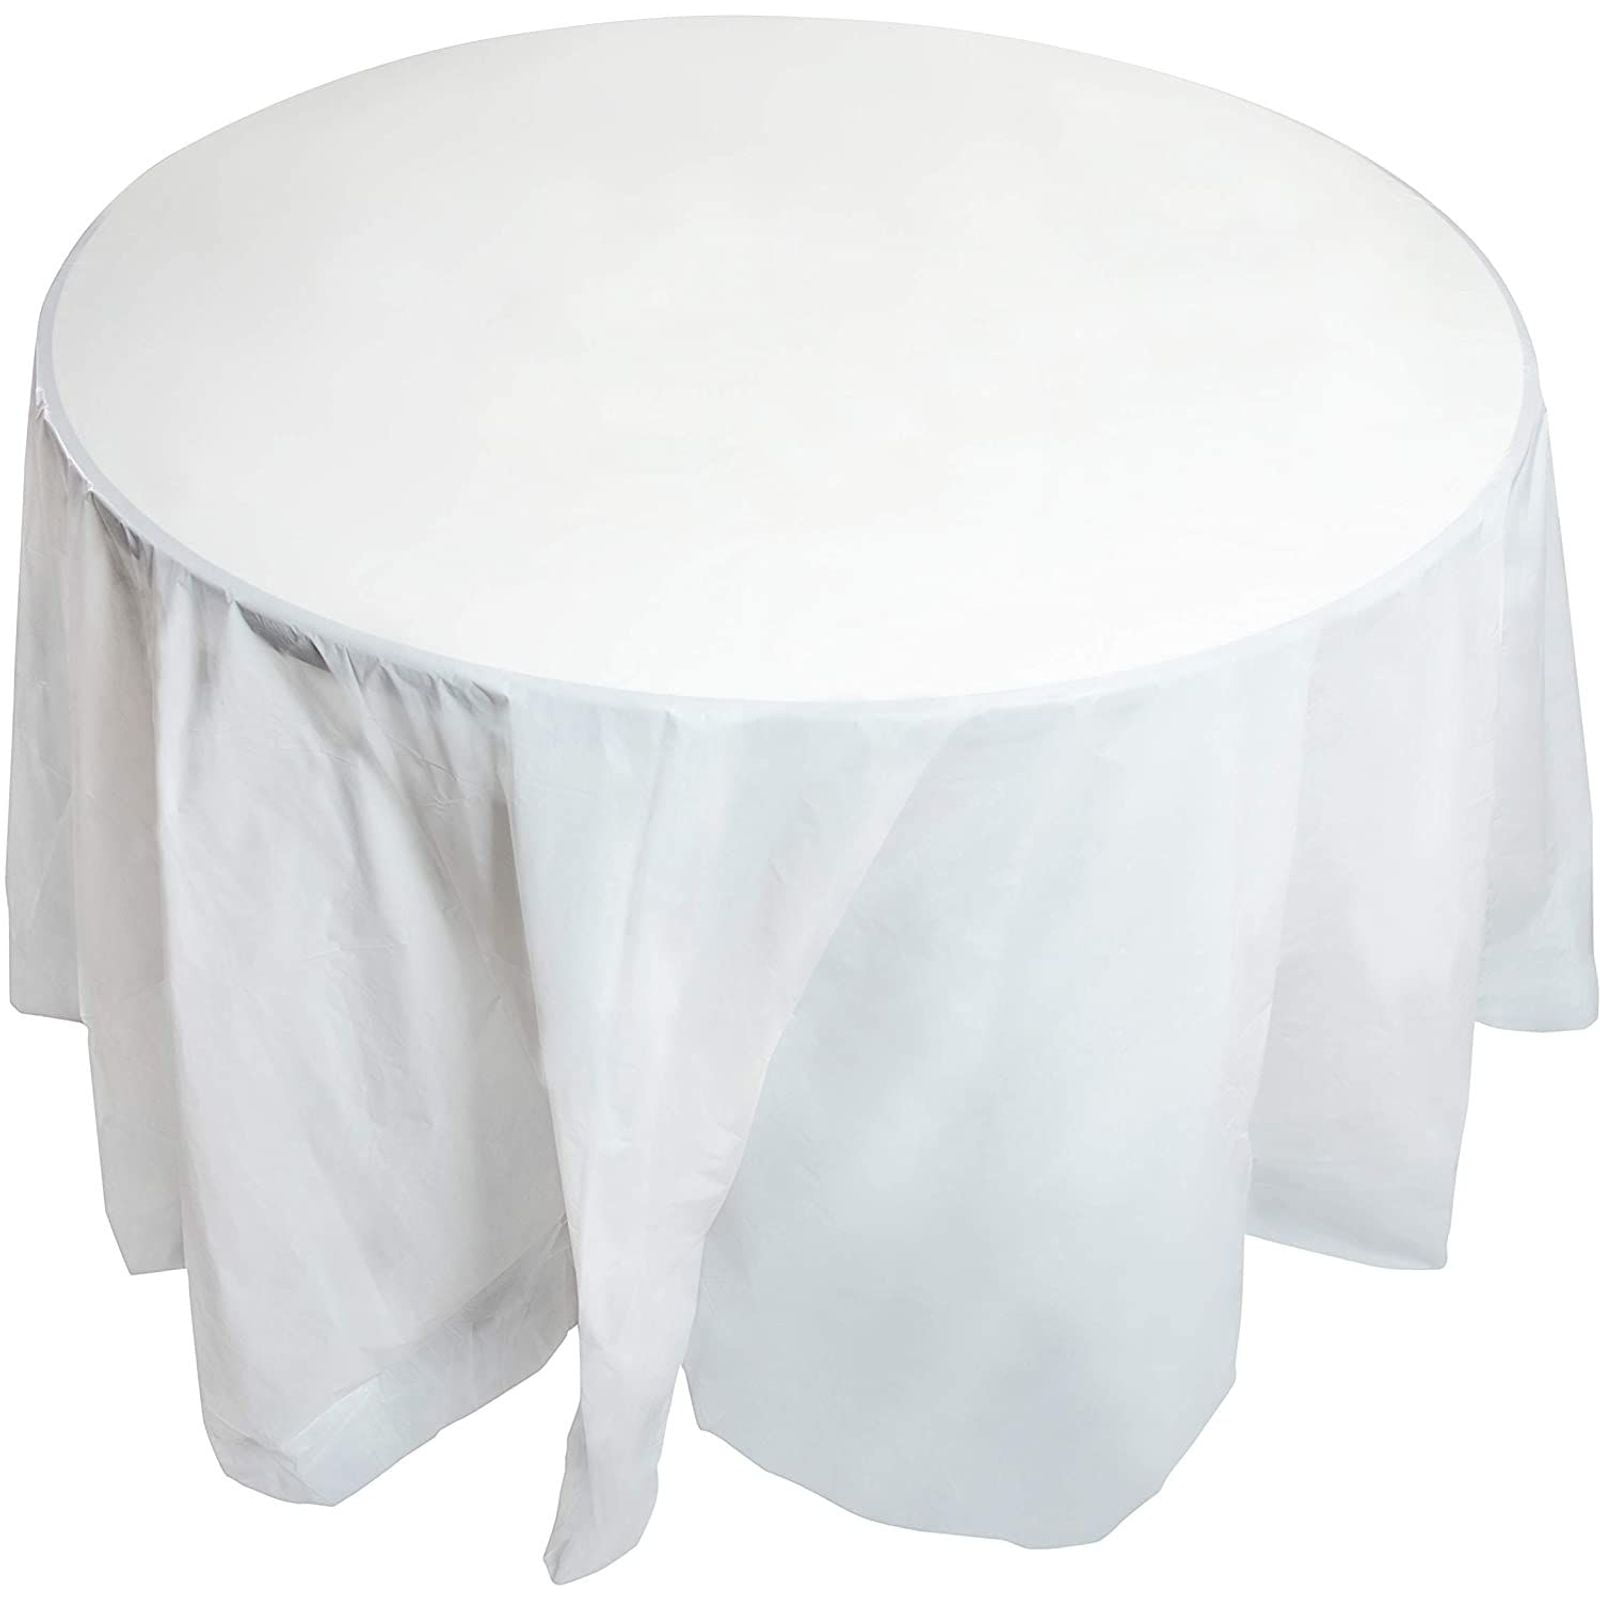 Birthday Party Table Cover, White Round Table Covers Plastic